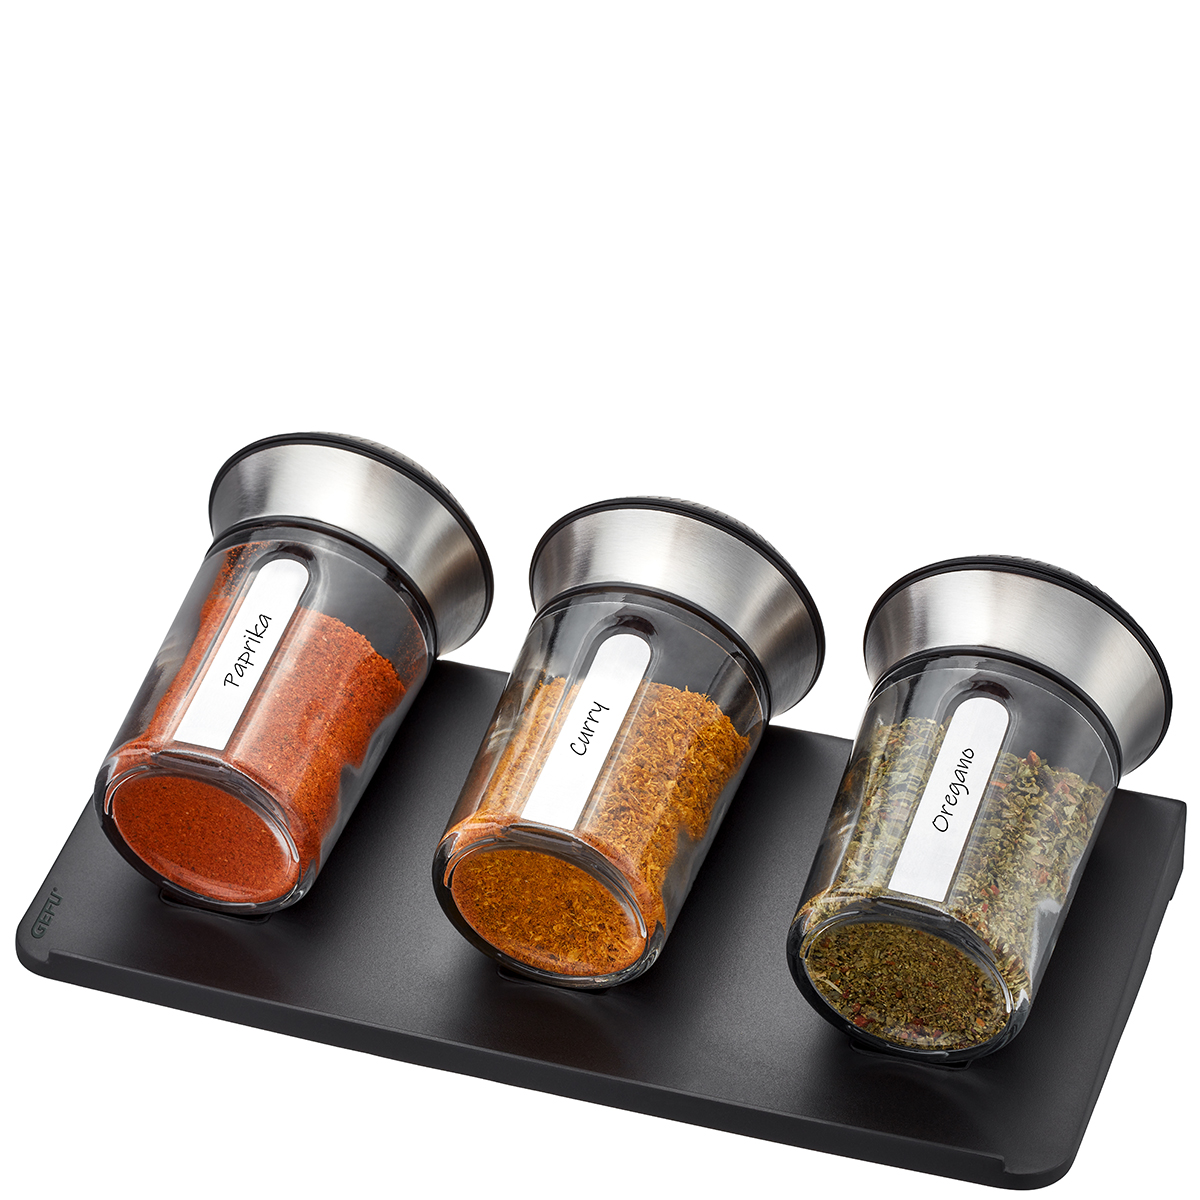 Spice and herb shaker organiser X-PLOSION®